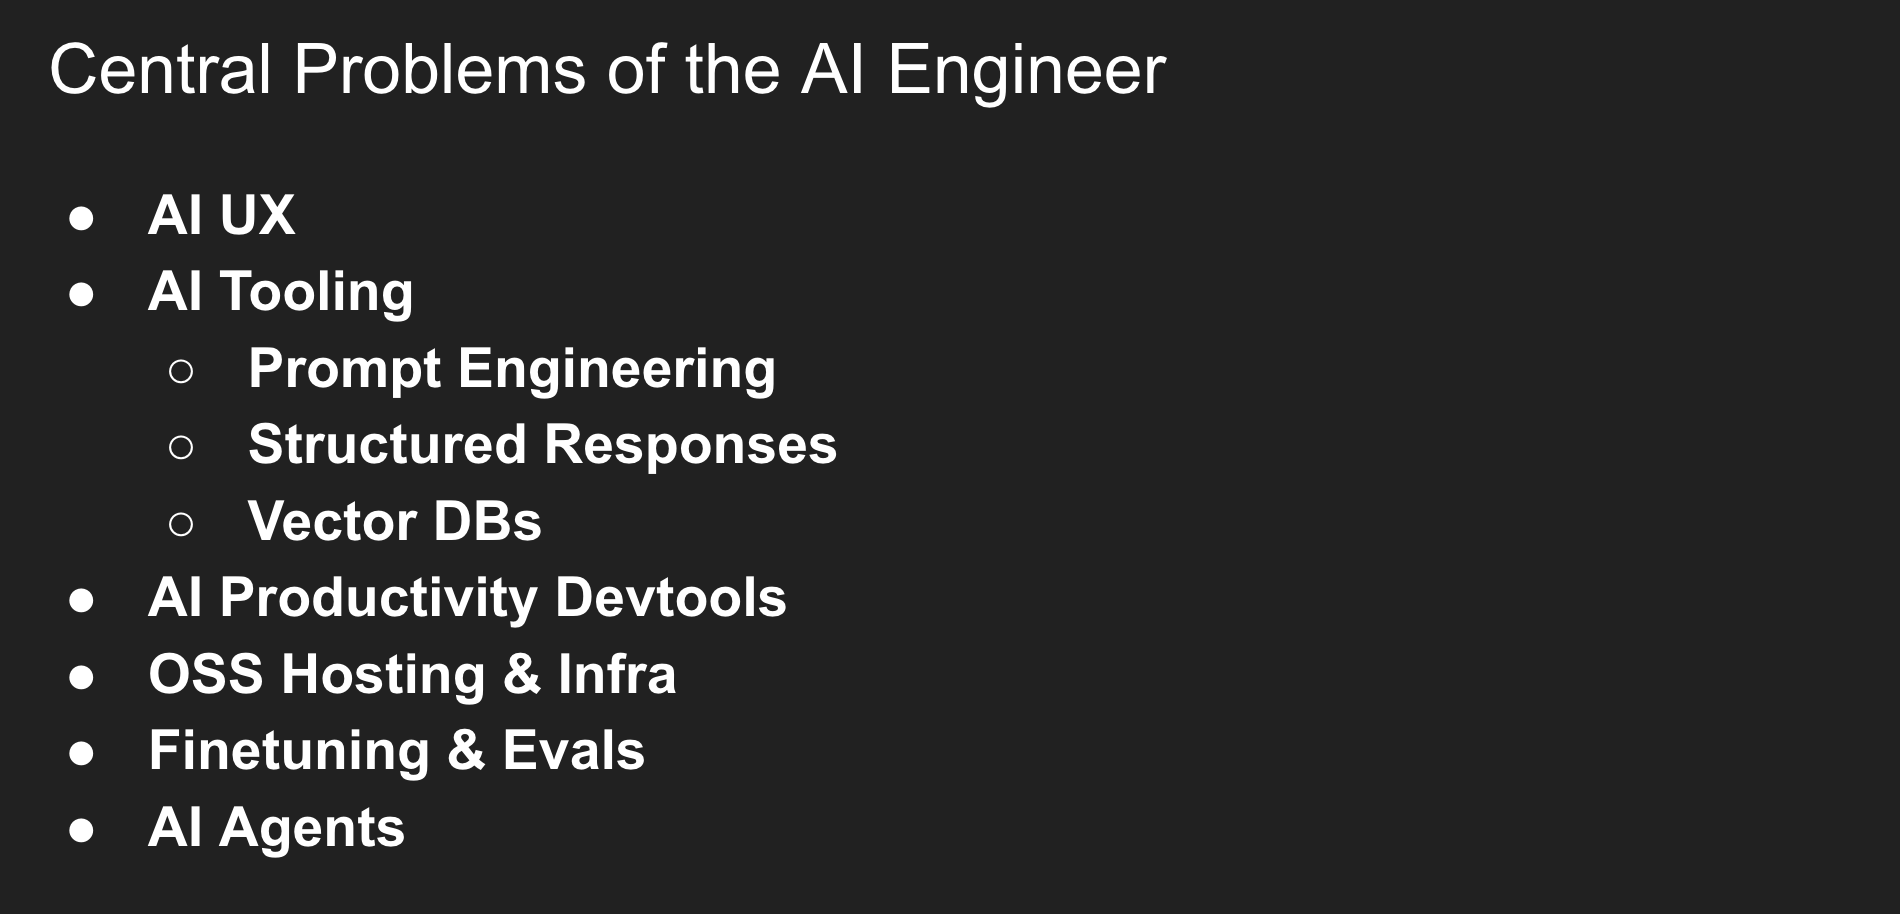 Central Problems of the Al Engineer